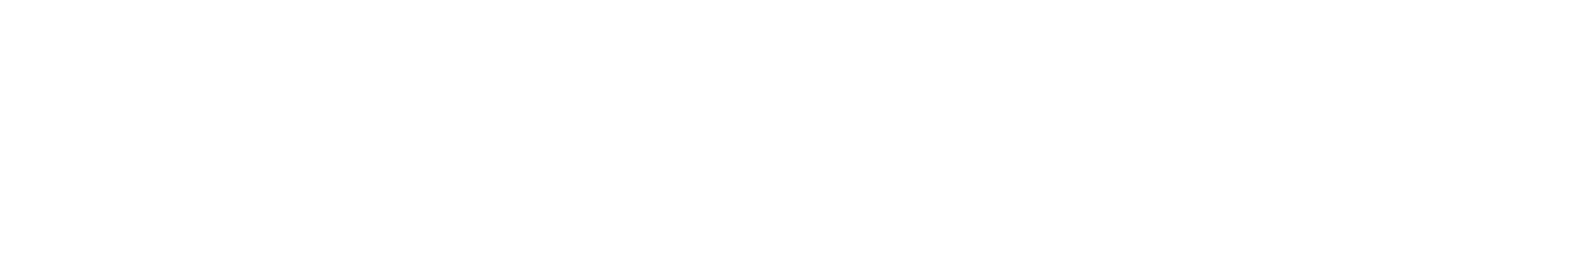 The Cheesecake Factory
 logo large for dark backgrounds (transparent PNG)